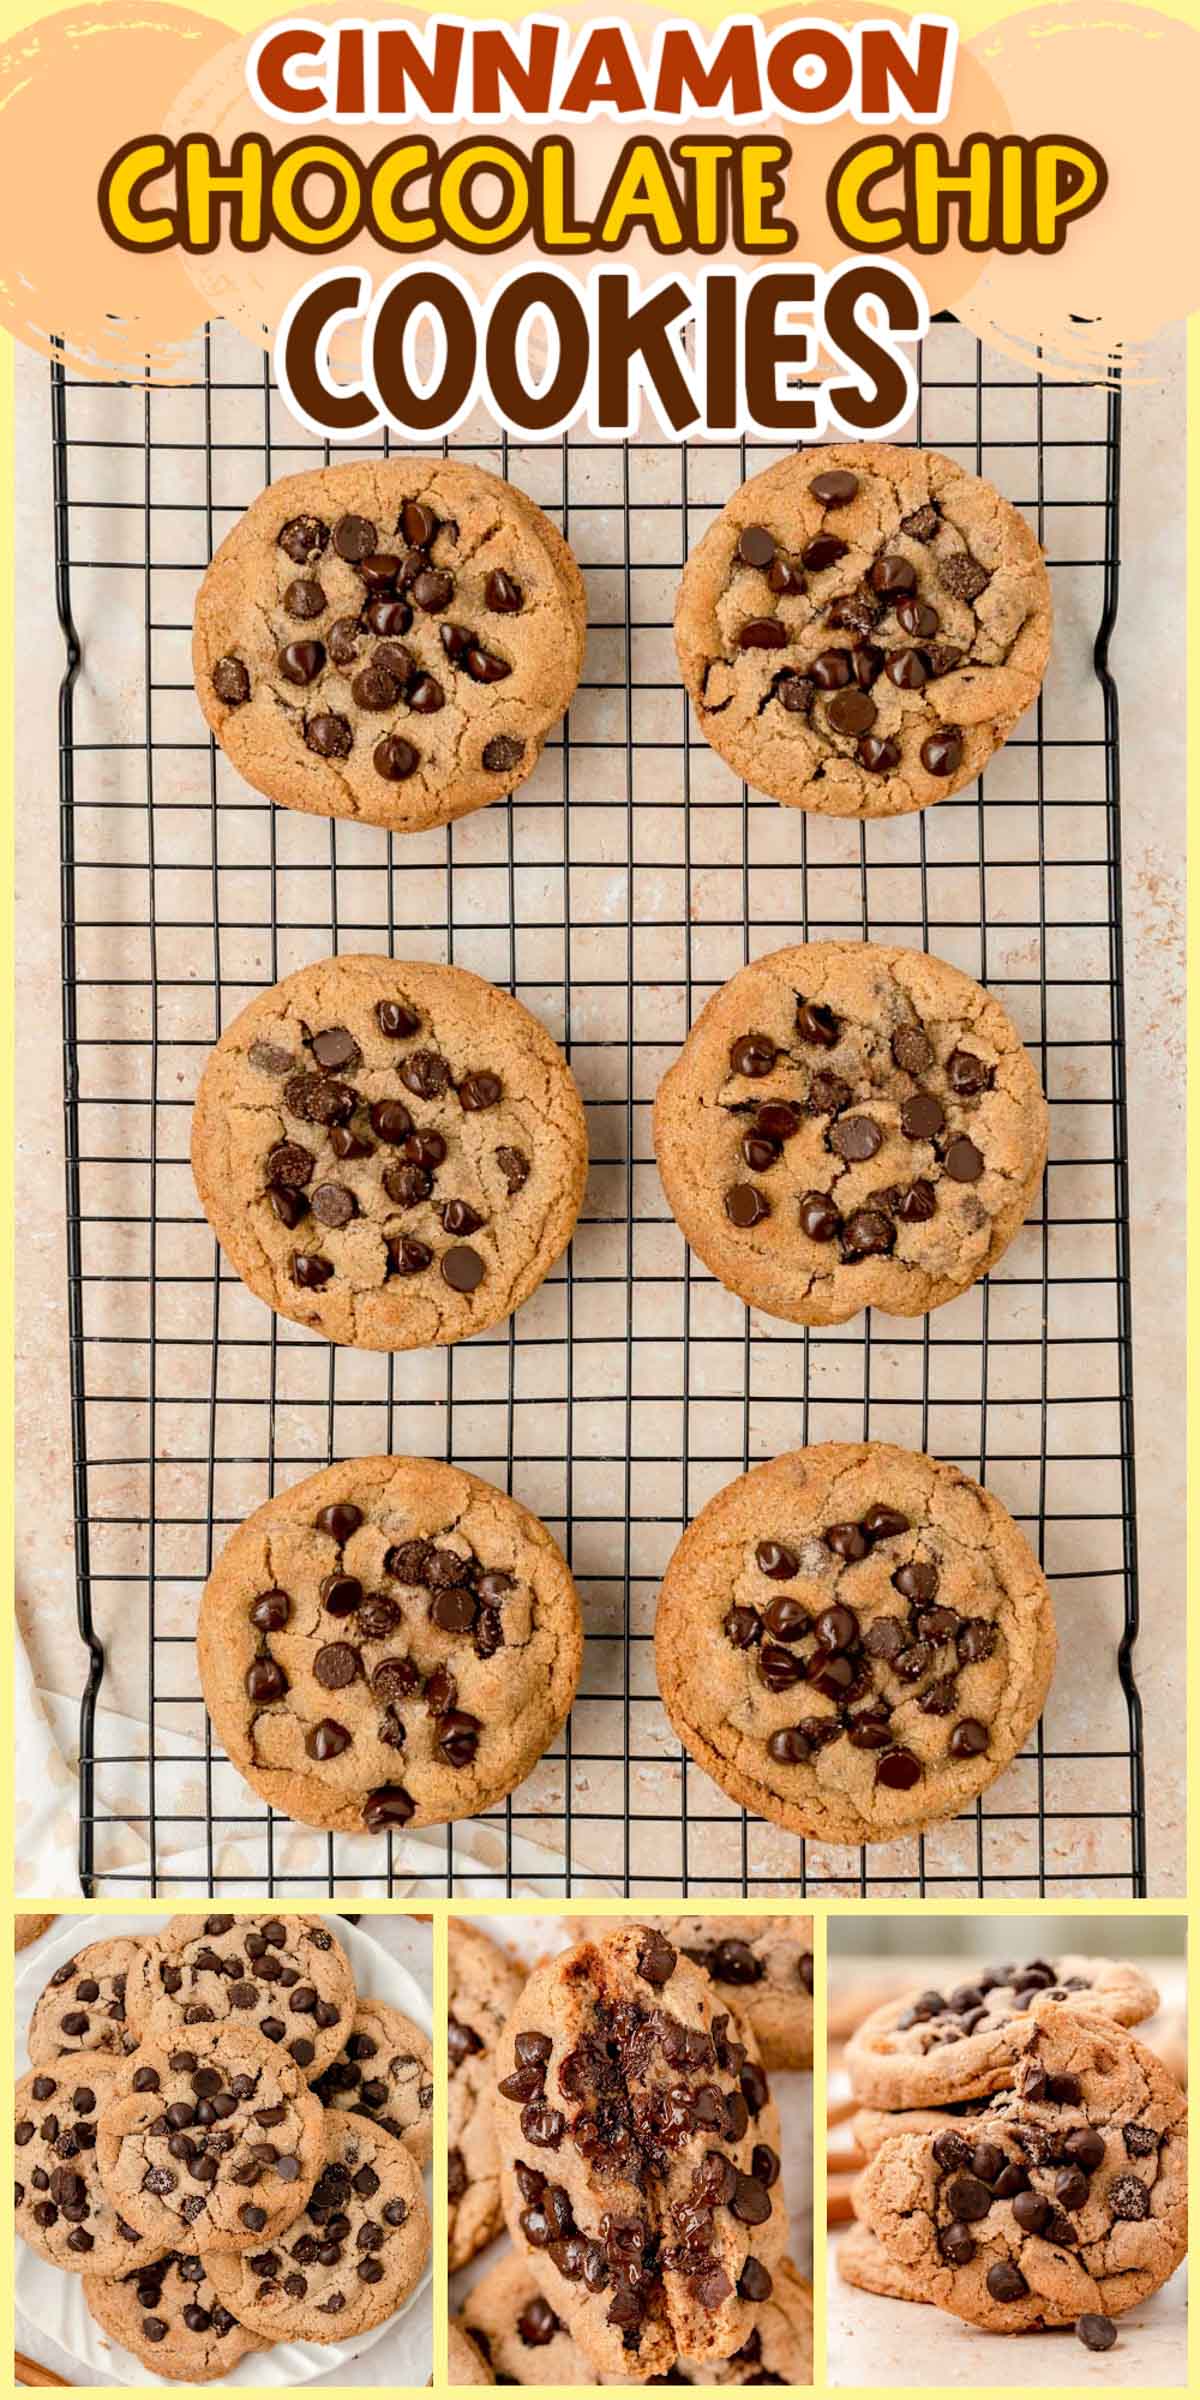 Tired of basic chocolate chip cookies? Try this recipe! These big, chewy Cinnamon Chocolate Chip Cookies are filled with sweet AND cozy flavor from the addition of ground cinnamon and browned butter! via @sugarandsoulco